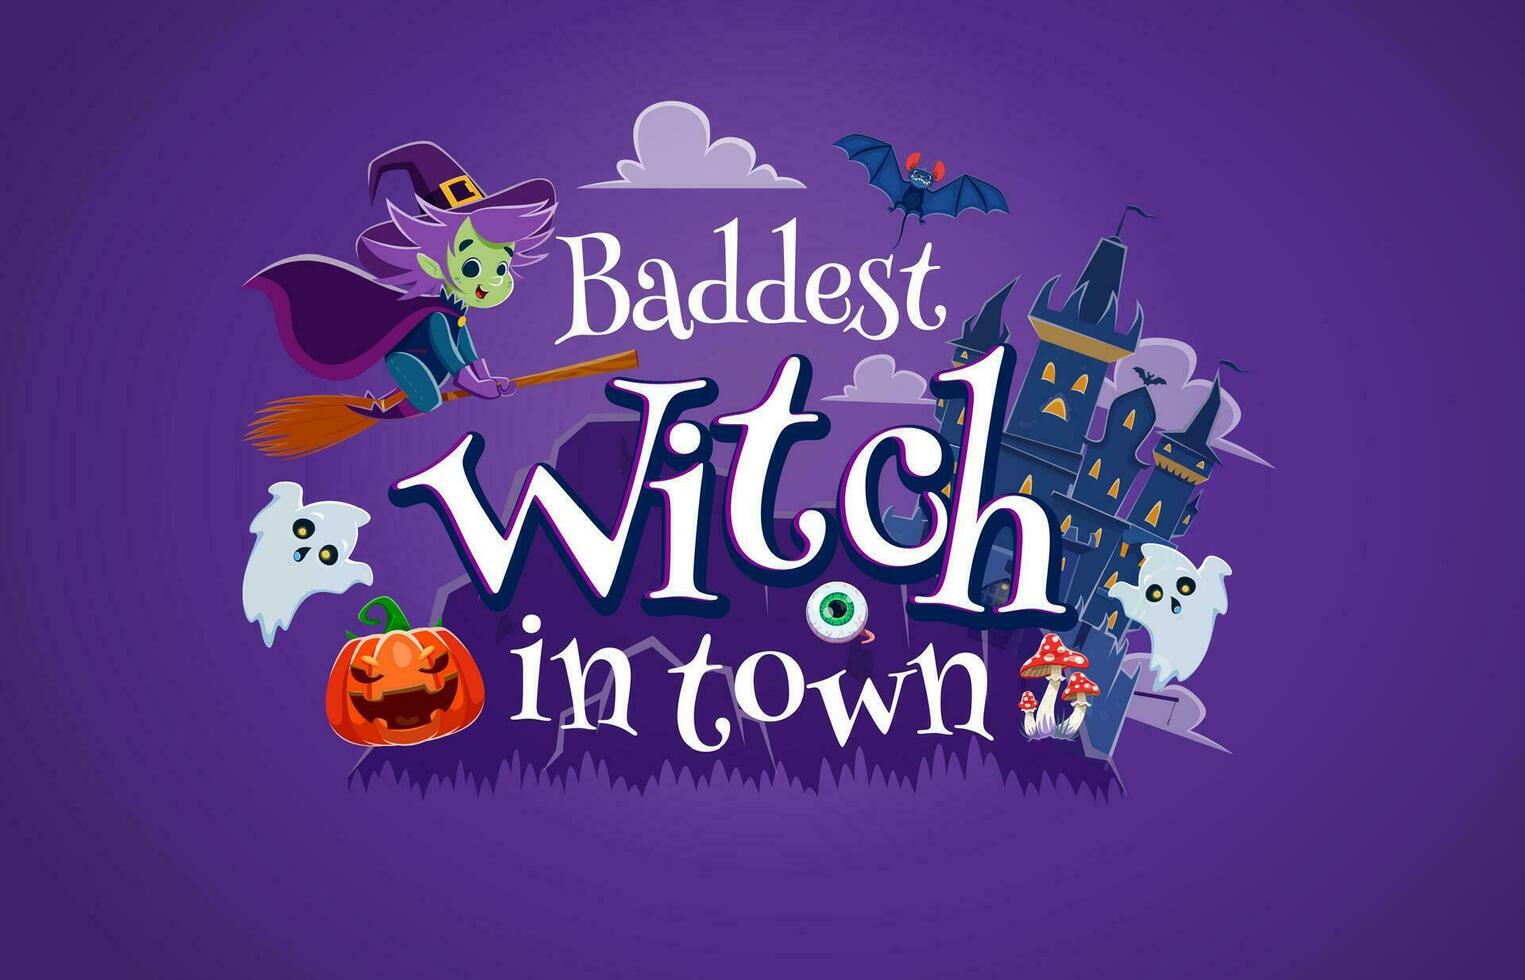 Halloween quote, baddest witch in town poster vector